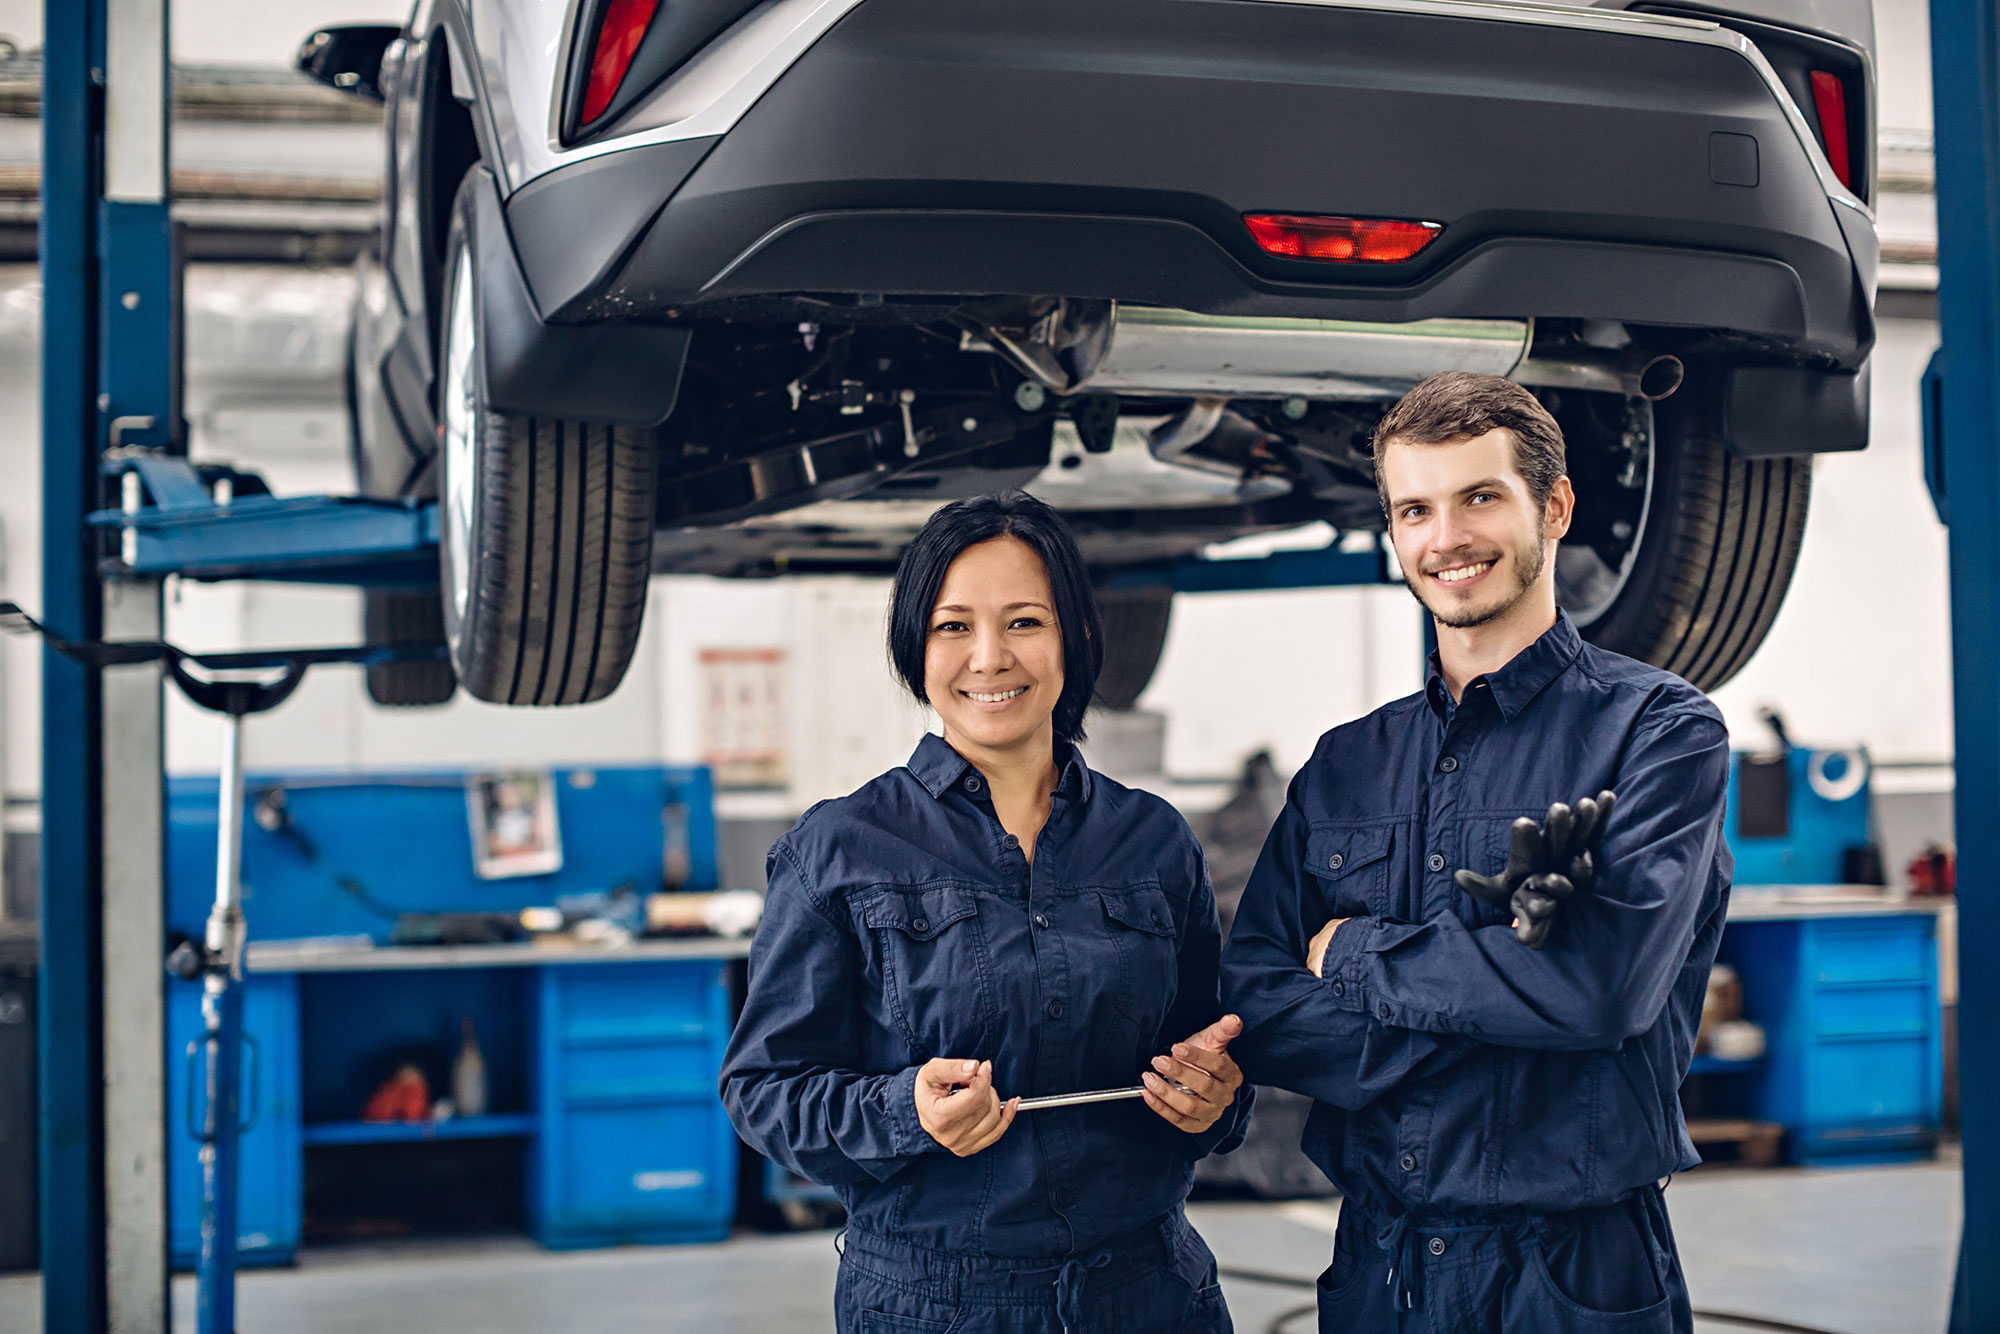 Inspection and repair service